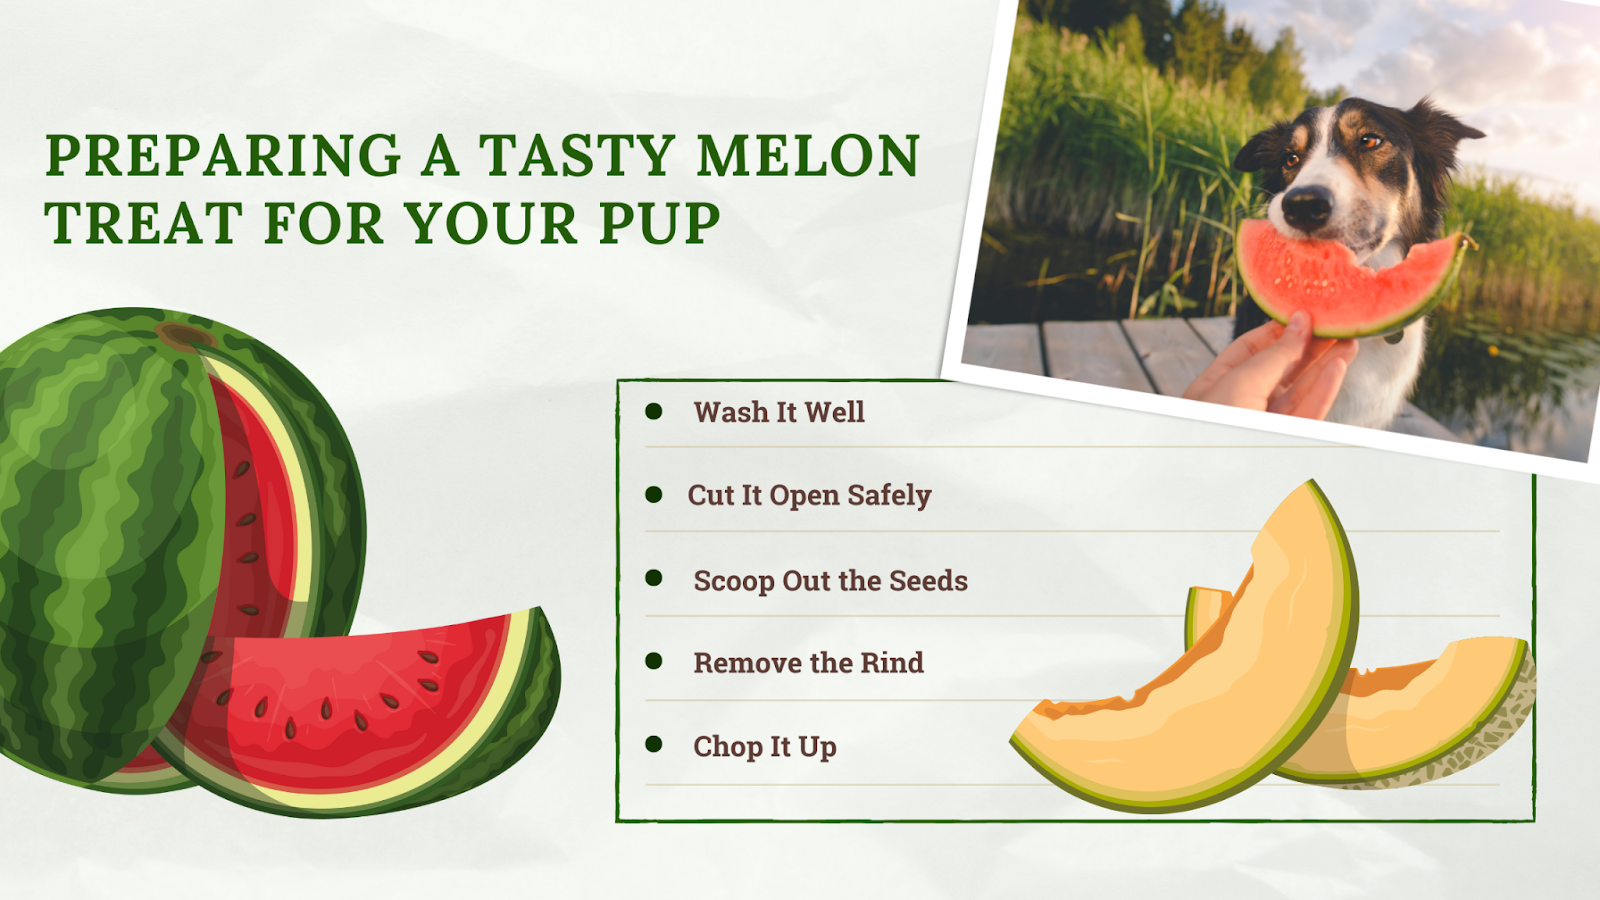 Preparing a tasty melon treat for dogs